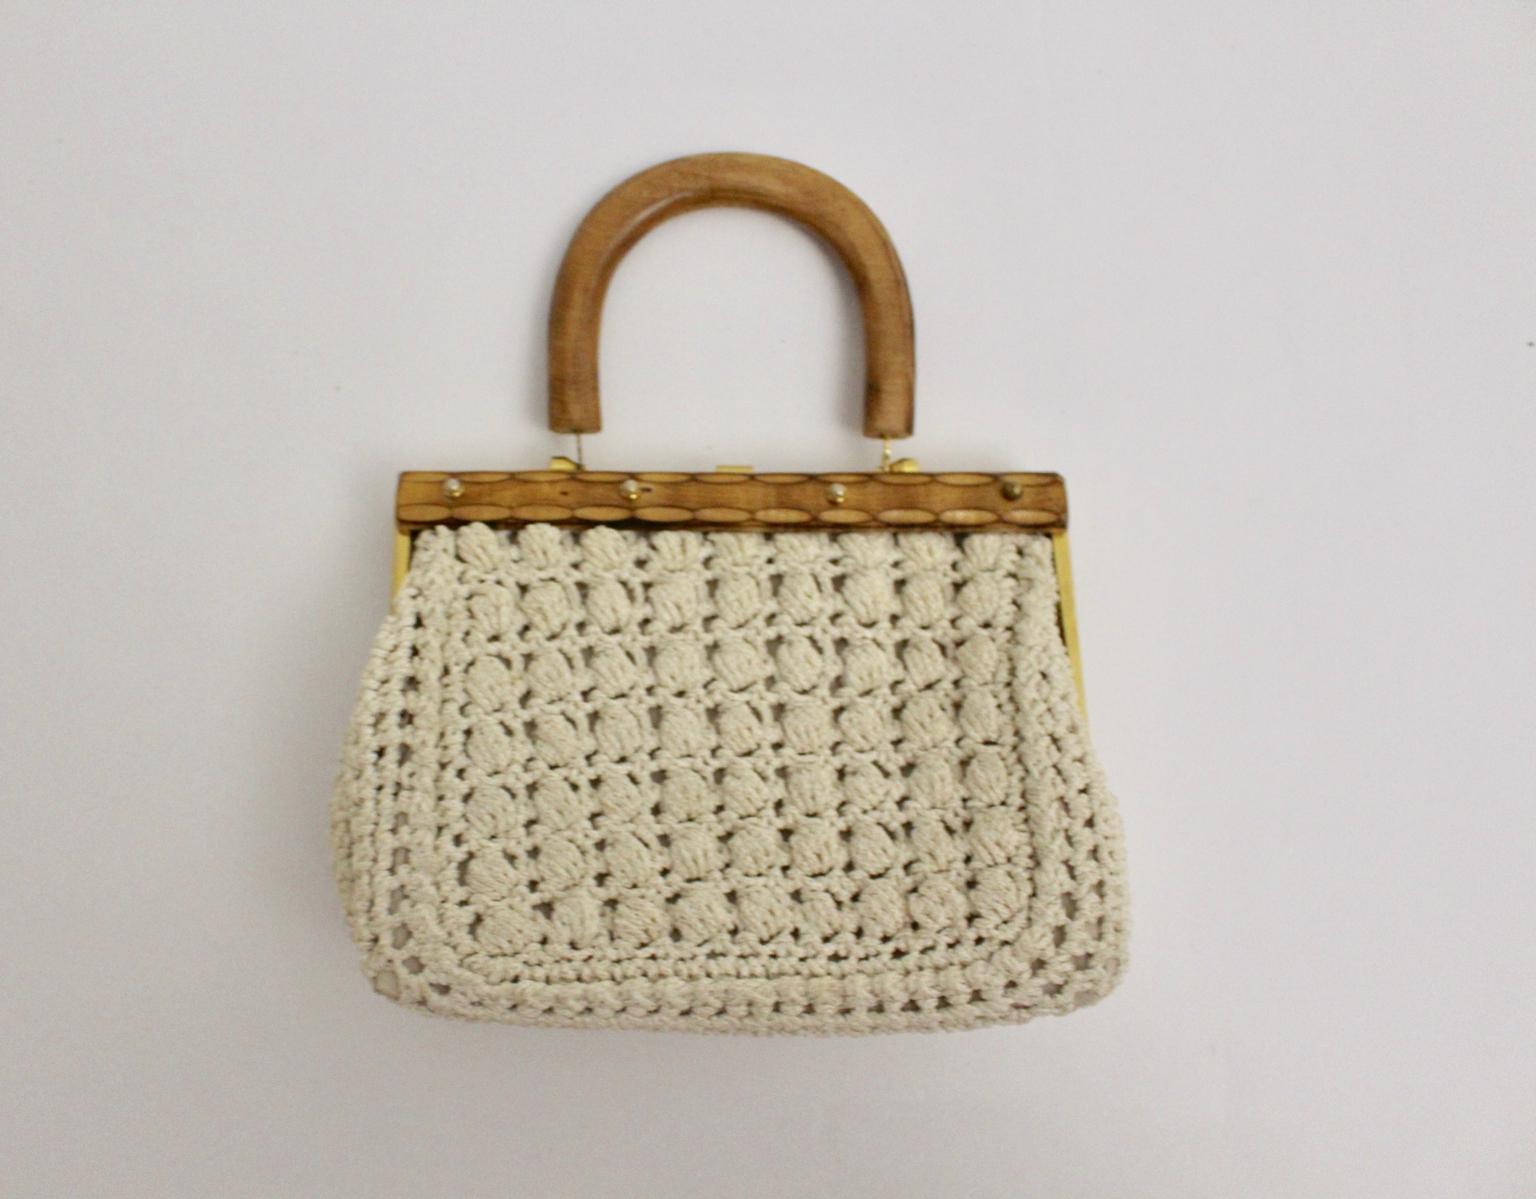 This handbag has a brass and wood frame and a snap lock. Made of cream-white crochet
The handlebag is lined with cream - white fabric.
One side pocket

Width: 25 cm
Height: 18.5 cm without the handle
Height: 29.5 cm with handle